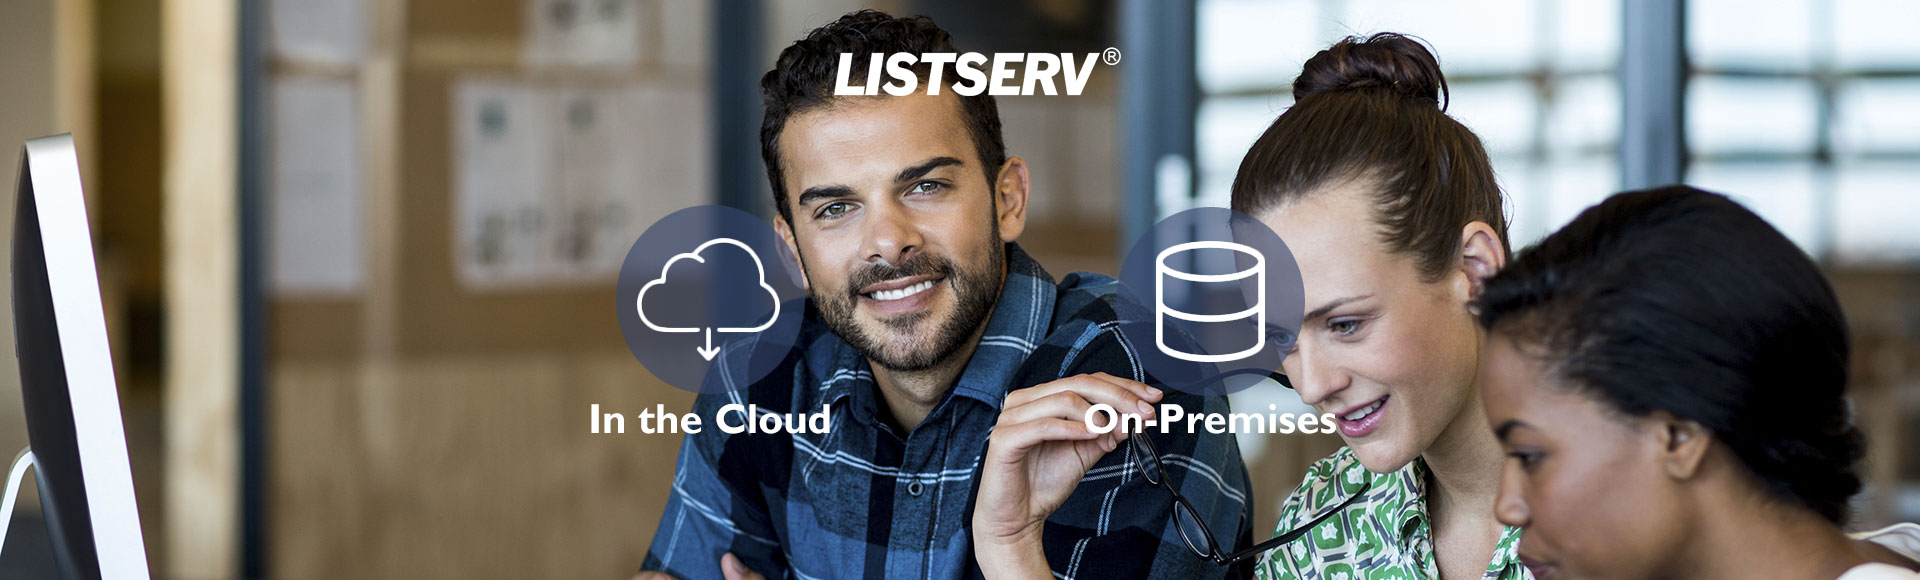 LISTSERV in the Cloud or on Premises